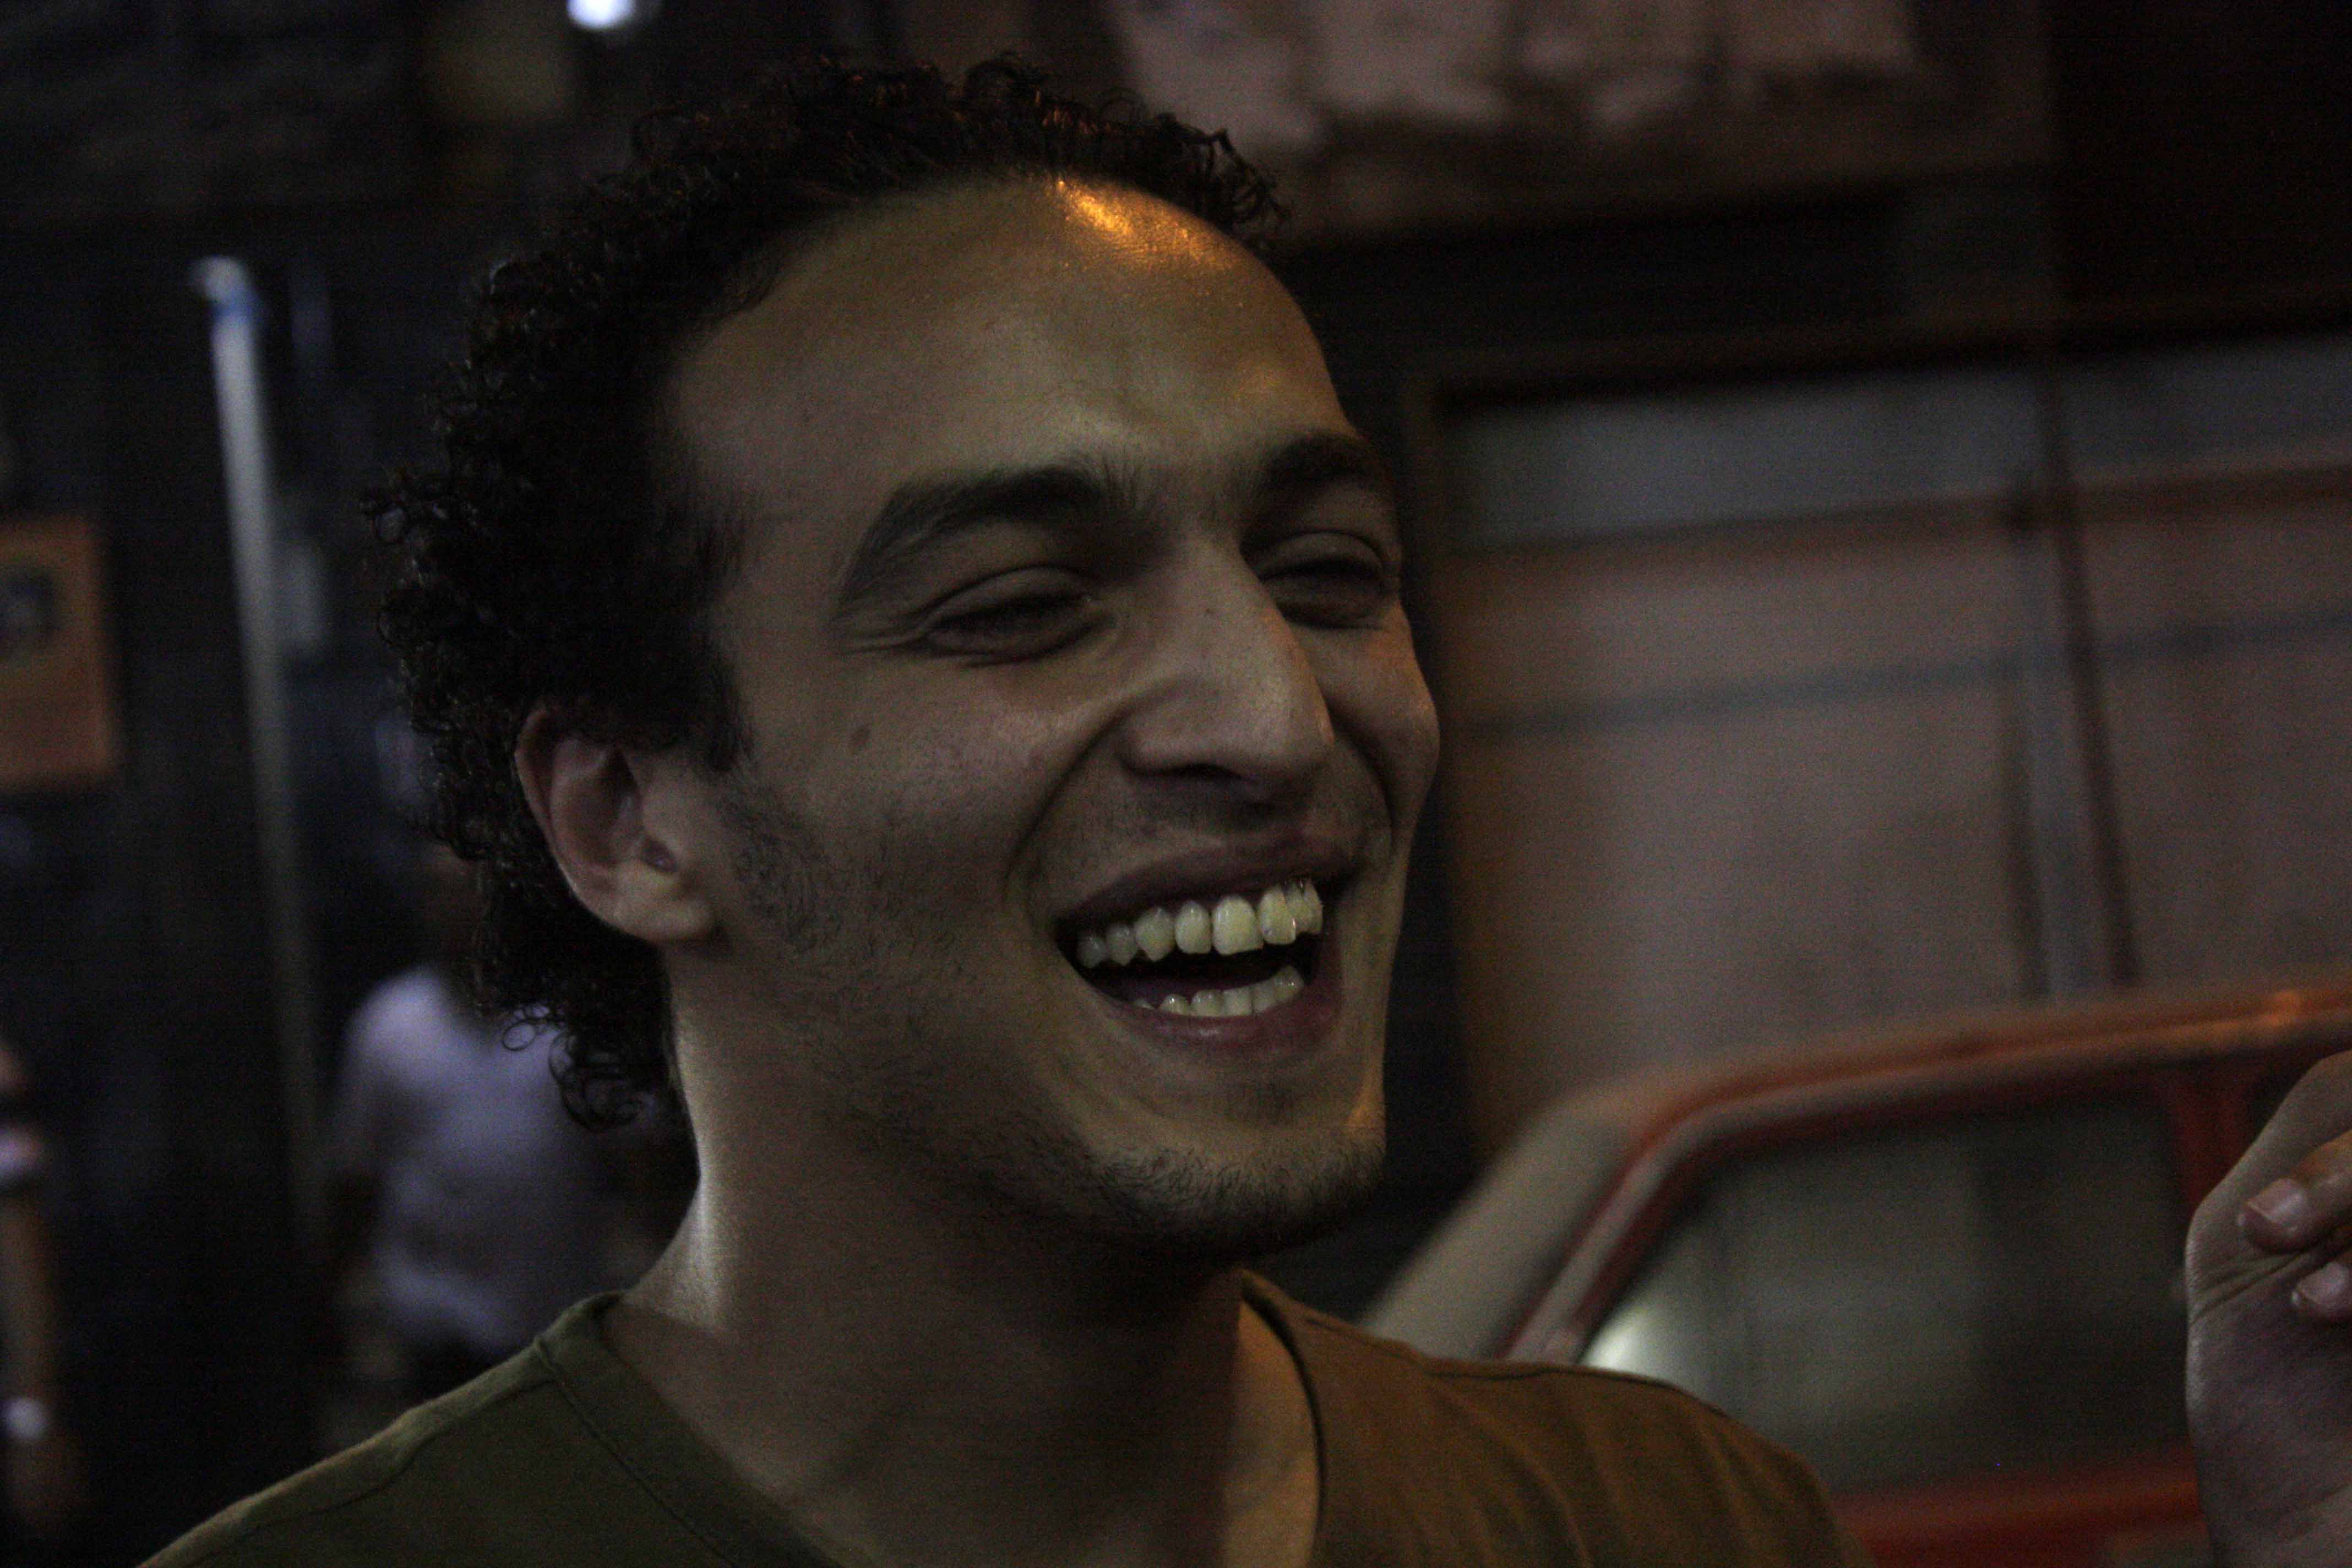 Photojournalist Mahmoud Abou Zeid, known as Shawkan, was arrested on Wednesday 14 August 2013 as he was taking pictures of the violent dispersal of the Rabaa al-Adaweya sit-in in August 2013. He is one of dozens of Egyptian journalists arrested since former President Mohamed Morsi was ousted on 3 July 2013.